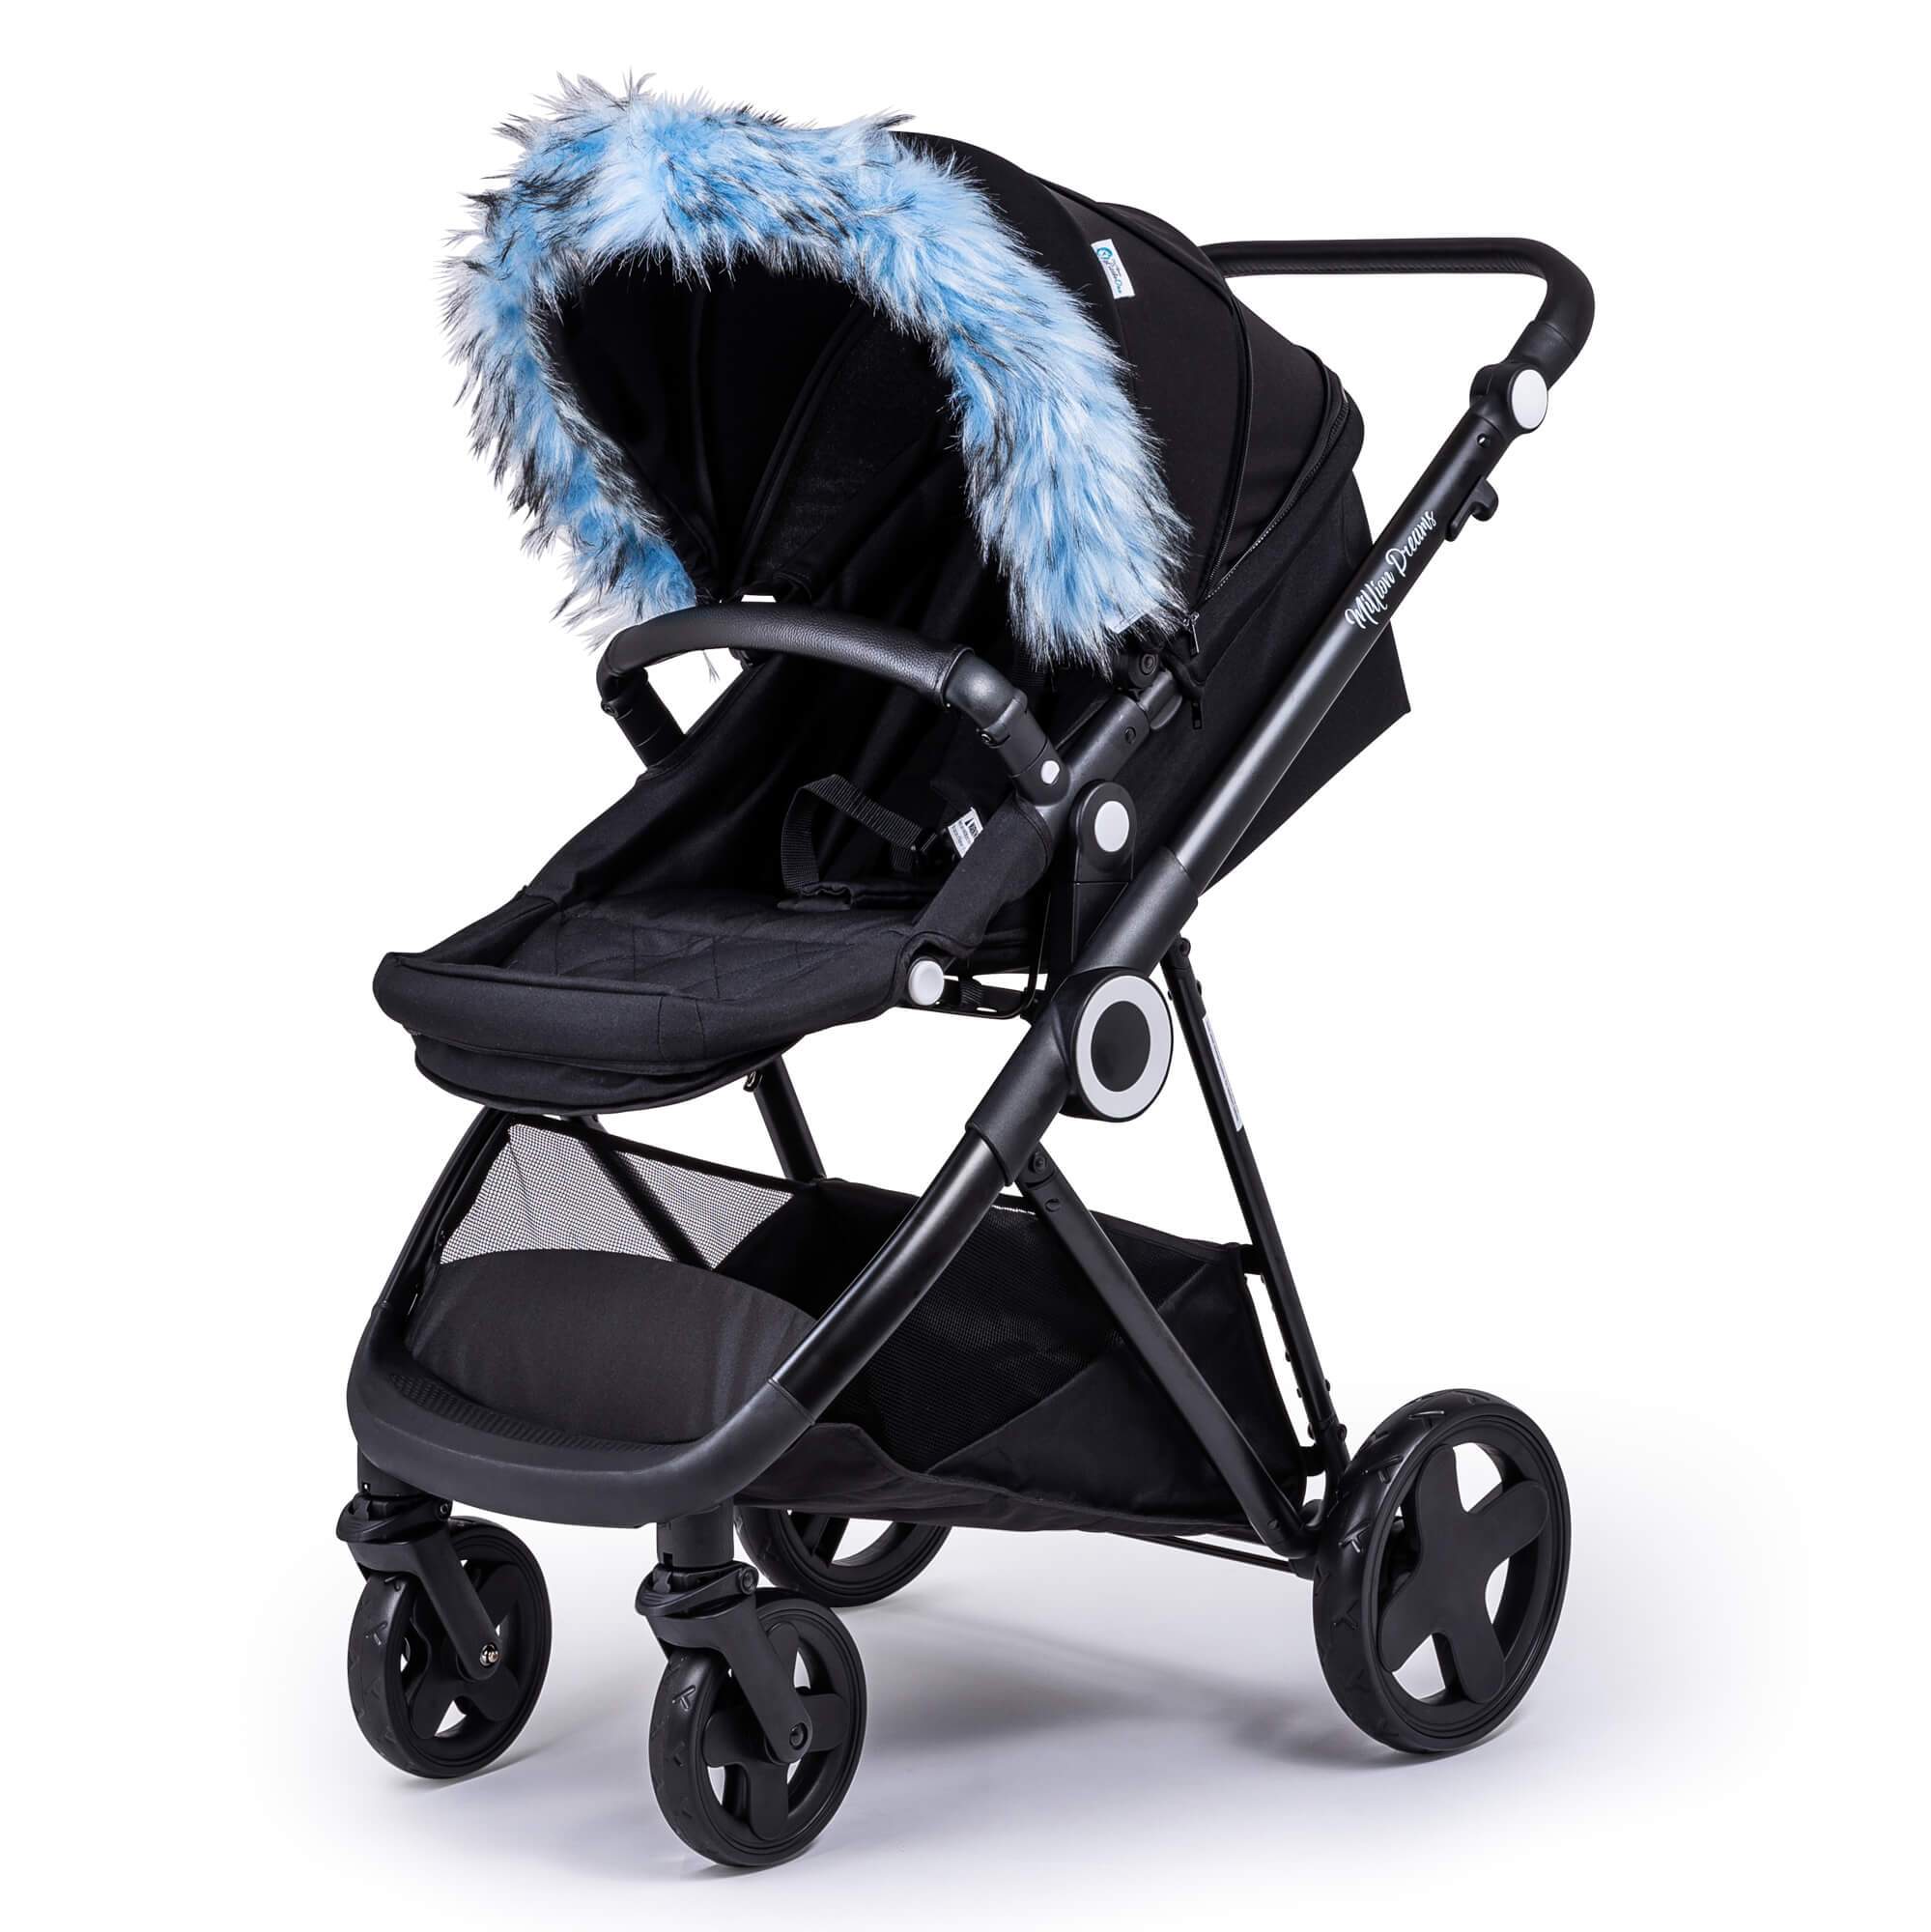 Pram Fur Hood Trim Attachment For Pushchair Compatible with Unilove - Light Blue / Fits All Models | For Your Little One